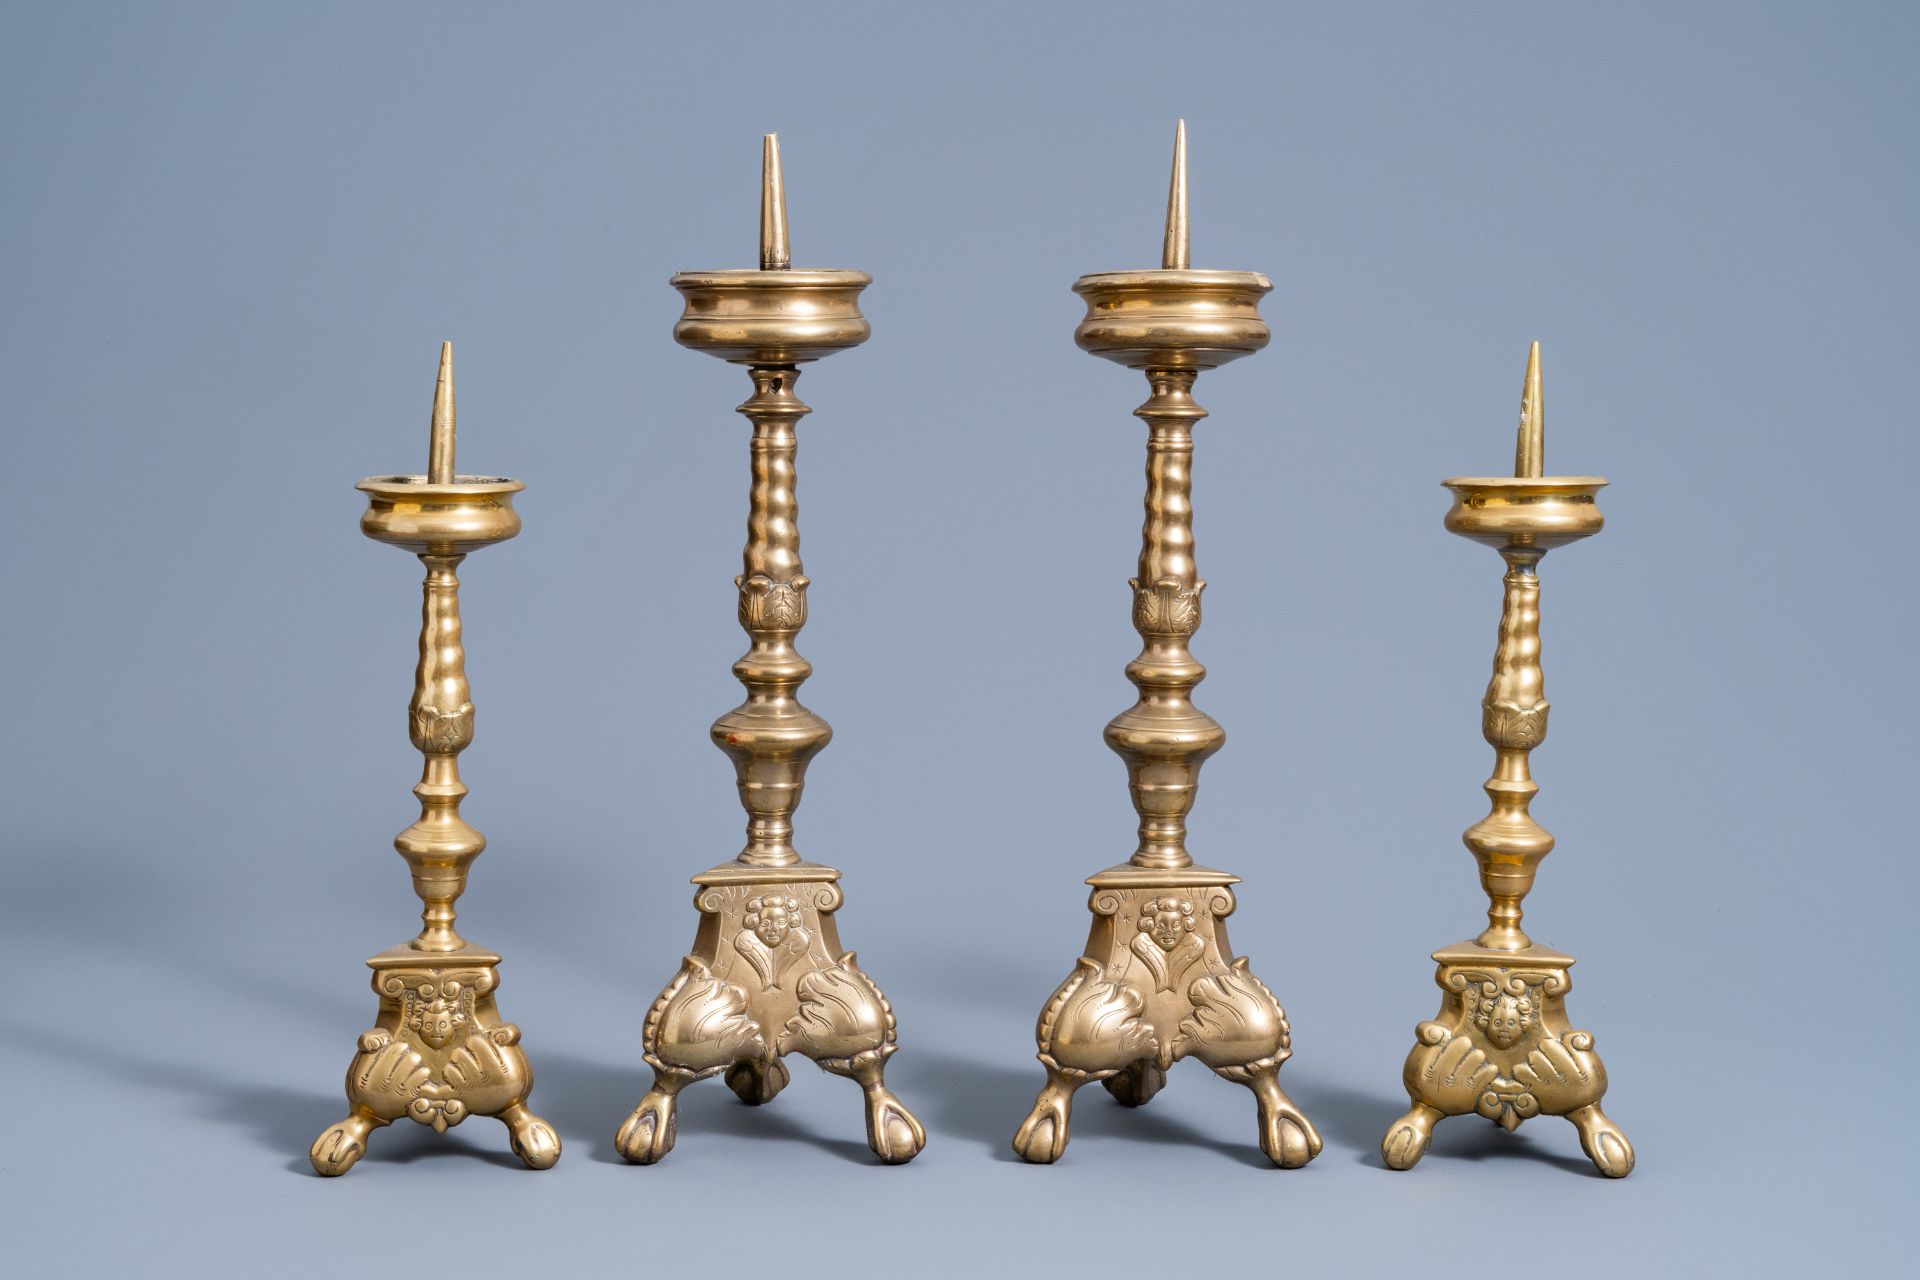 Two pairs of bronze pricket candlesticks, Flanders or The Netherlands, 17th C. - Image 2 of 7